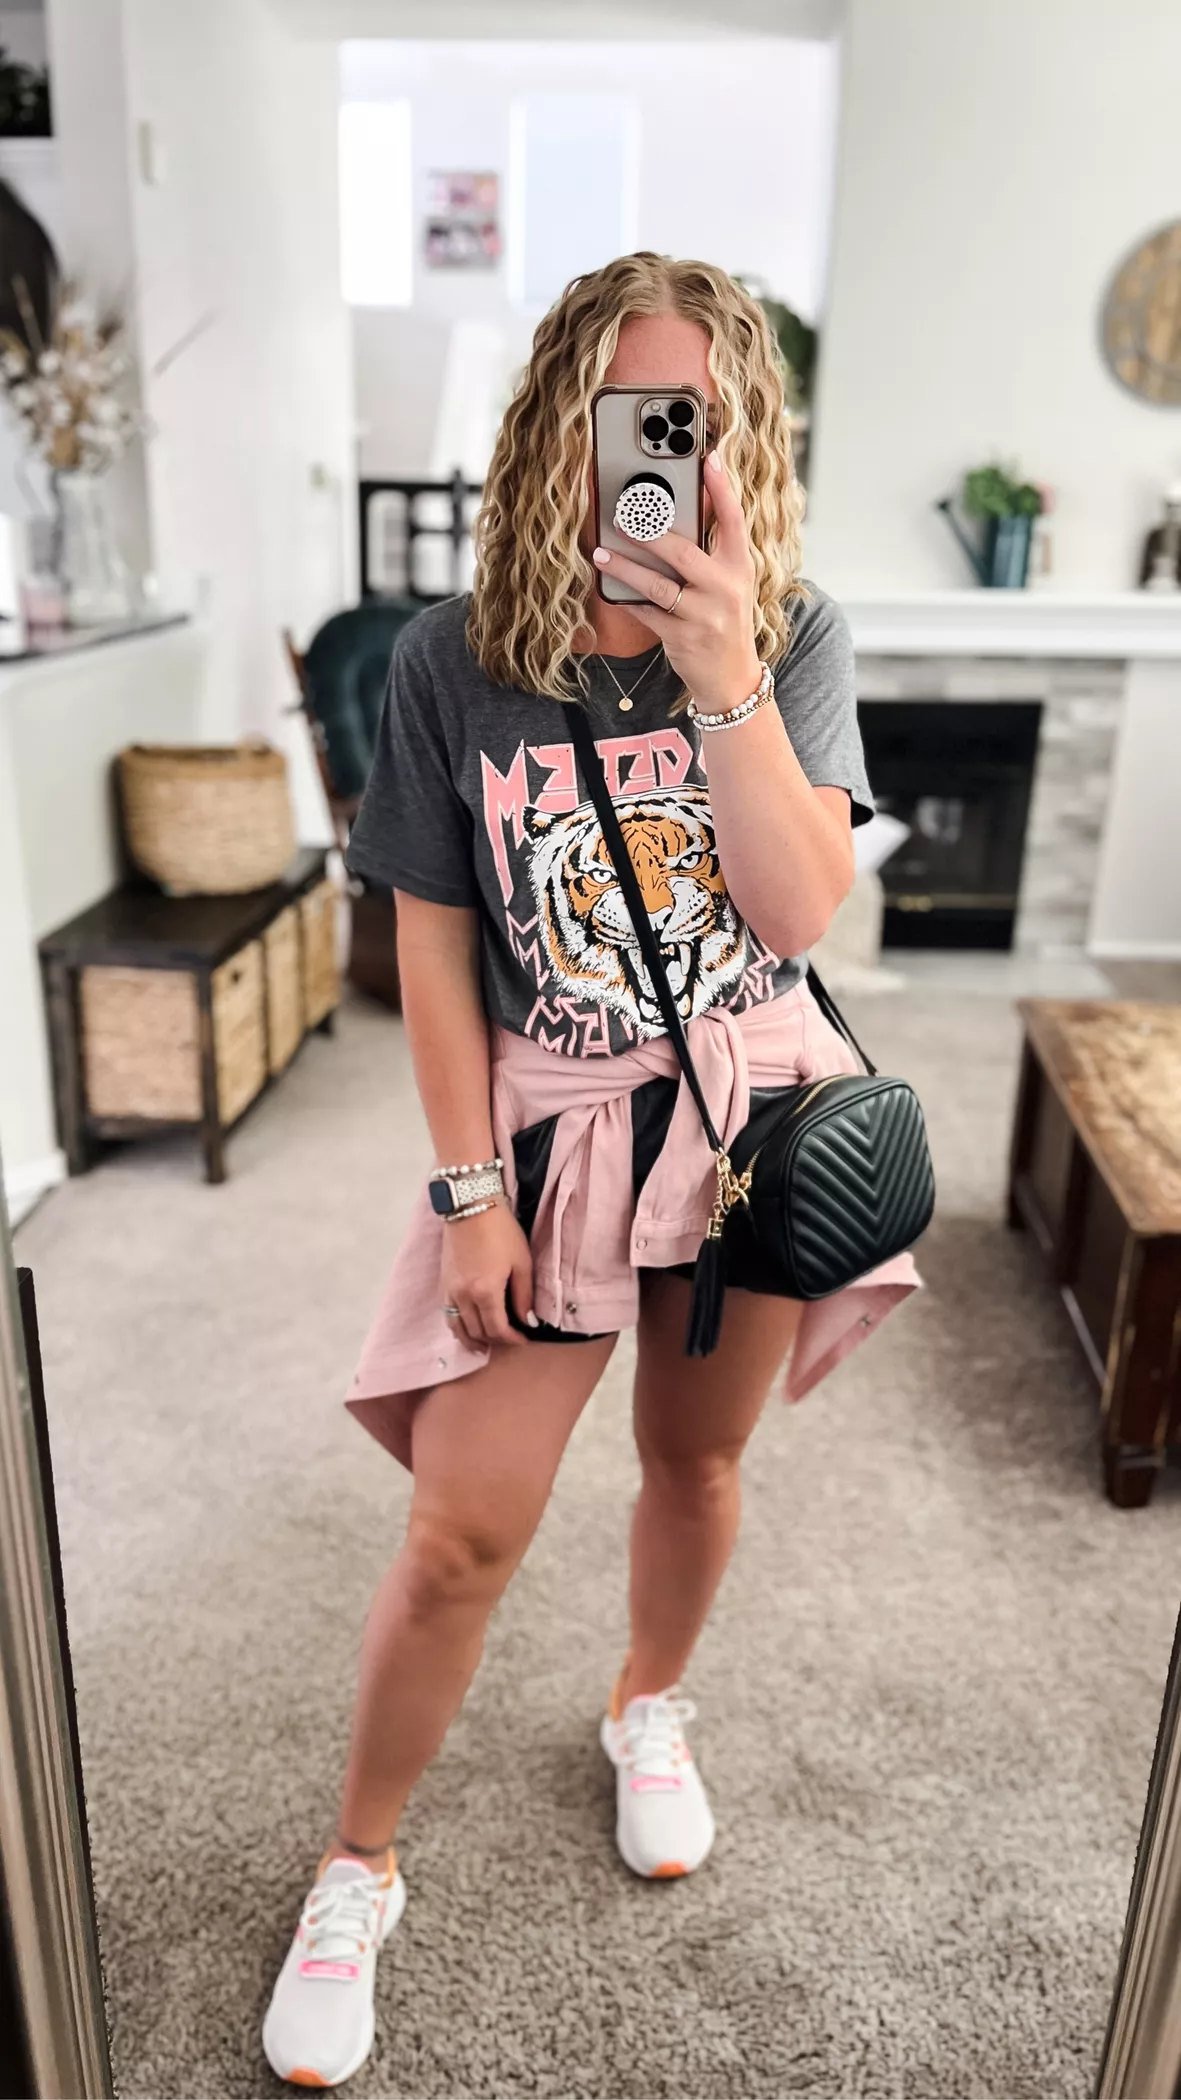 summer outfit with sneakers  Summer outfits for moms, Sneaker outfits  women, Biker outfit